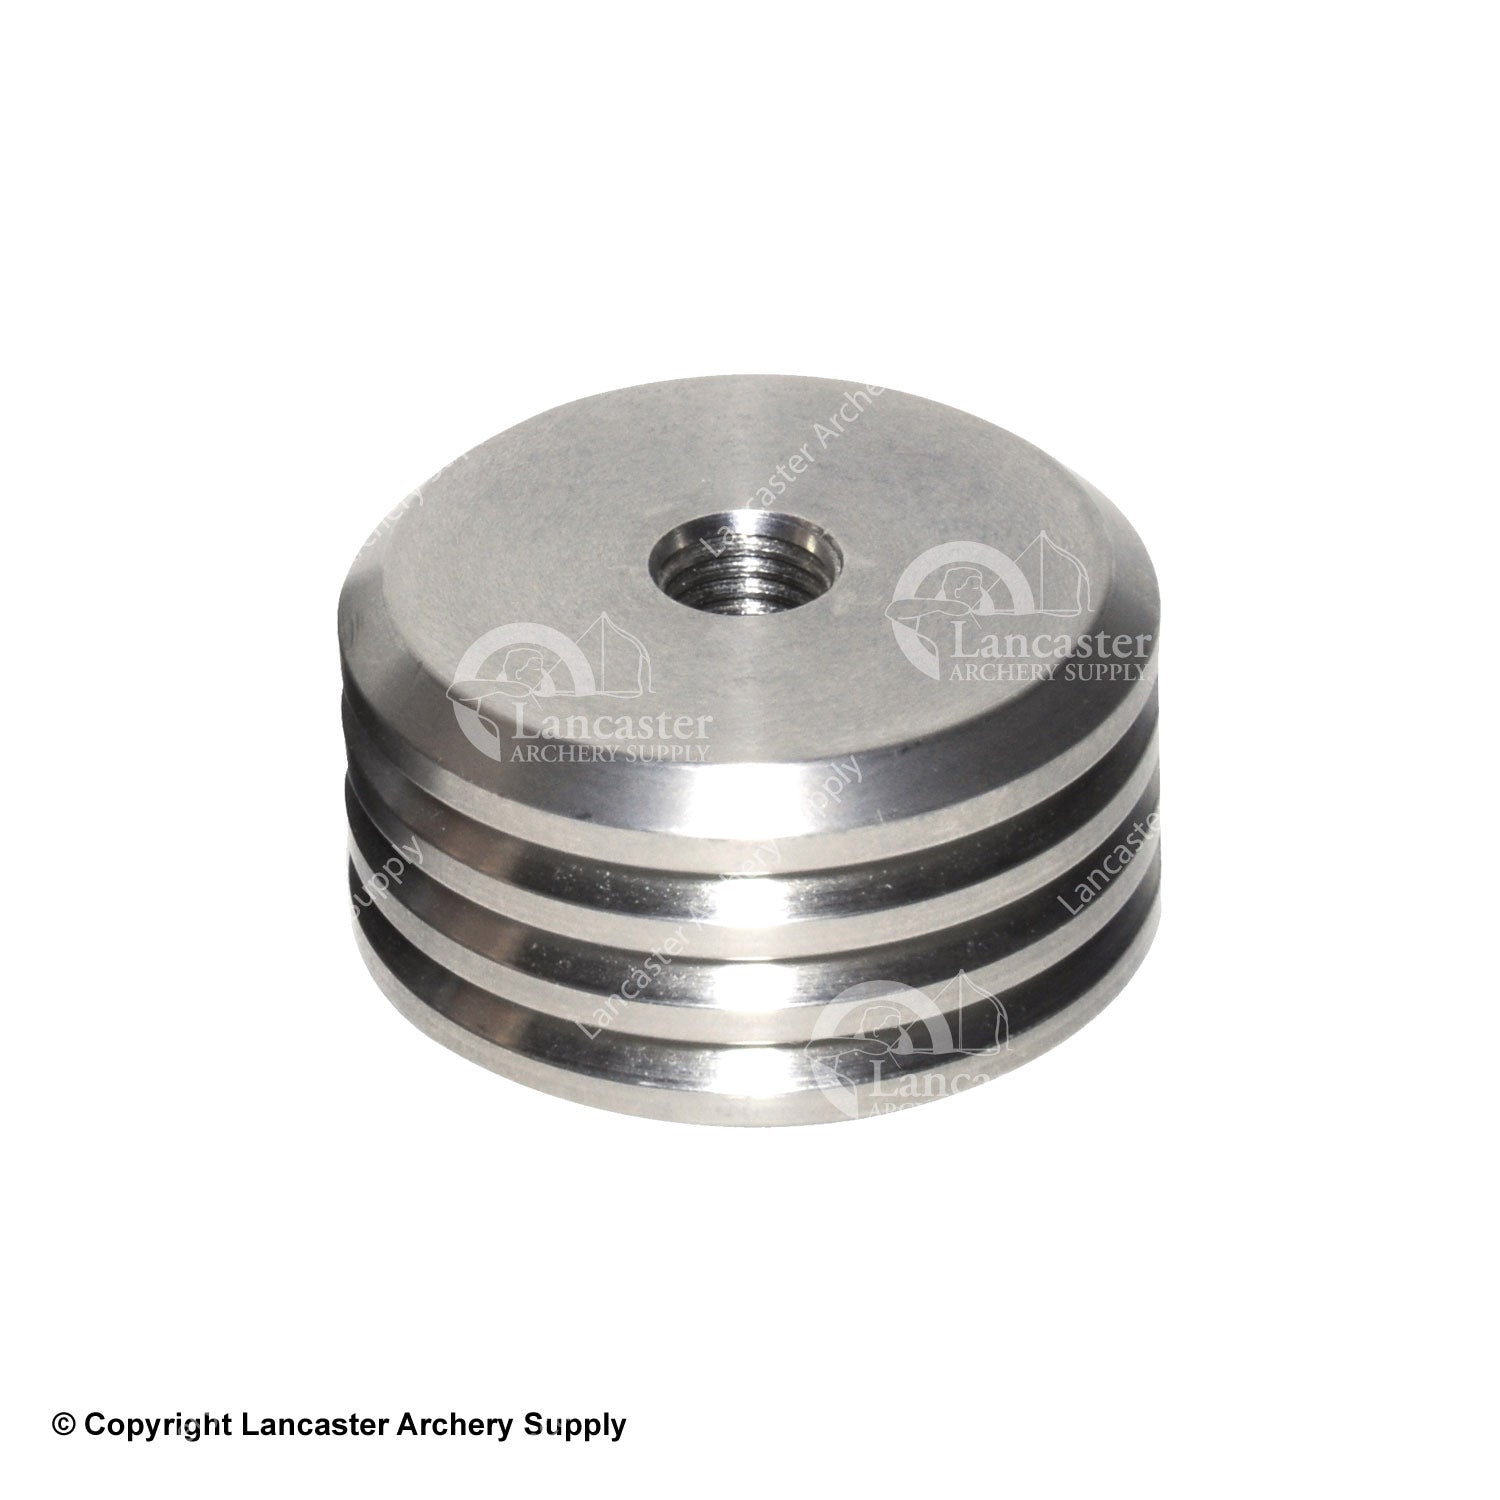 Bee Stinger 4 oz. Solid Stack Weight (Stainless Steel)